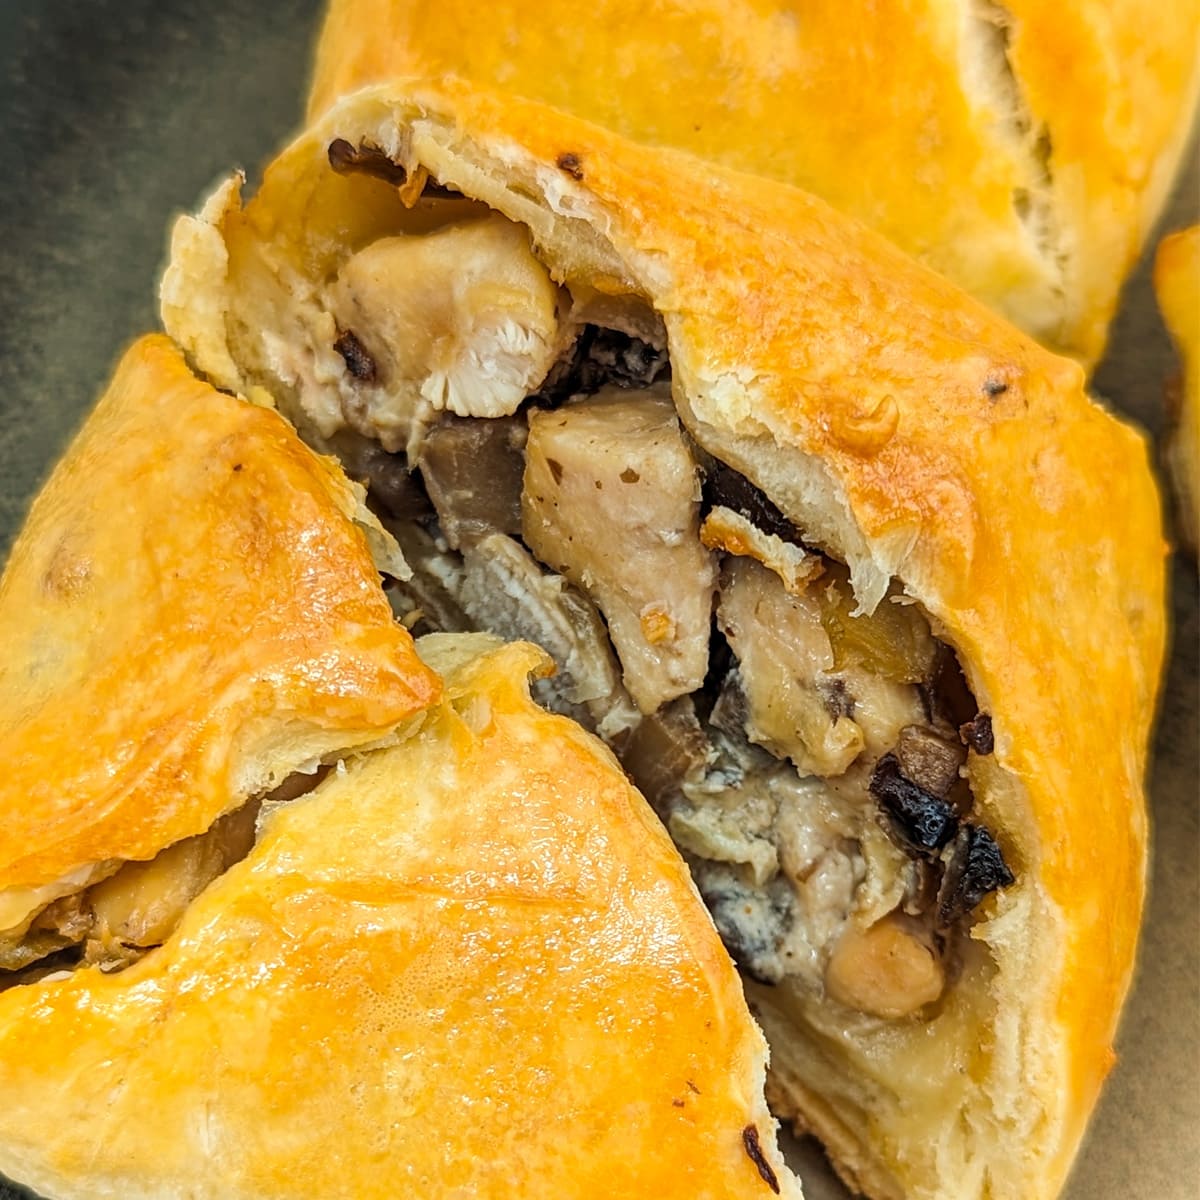 Two halves of chicken parcels in puff pastry made from scratch.